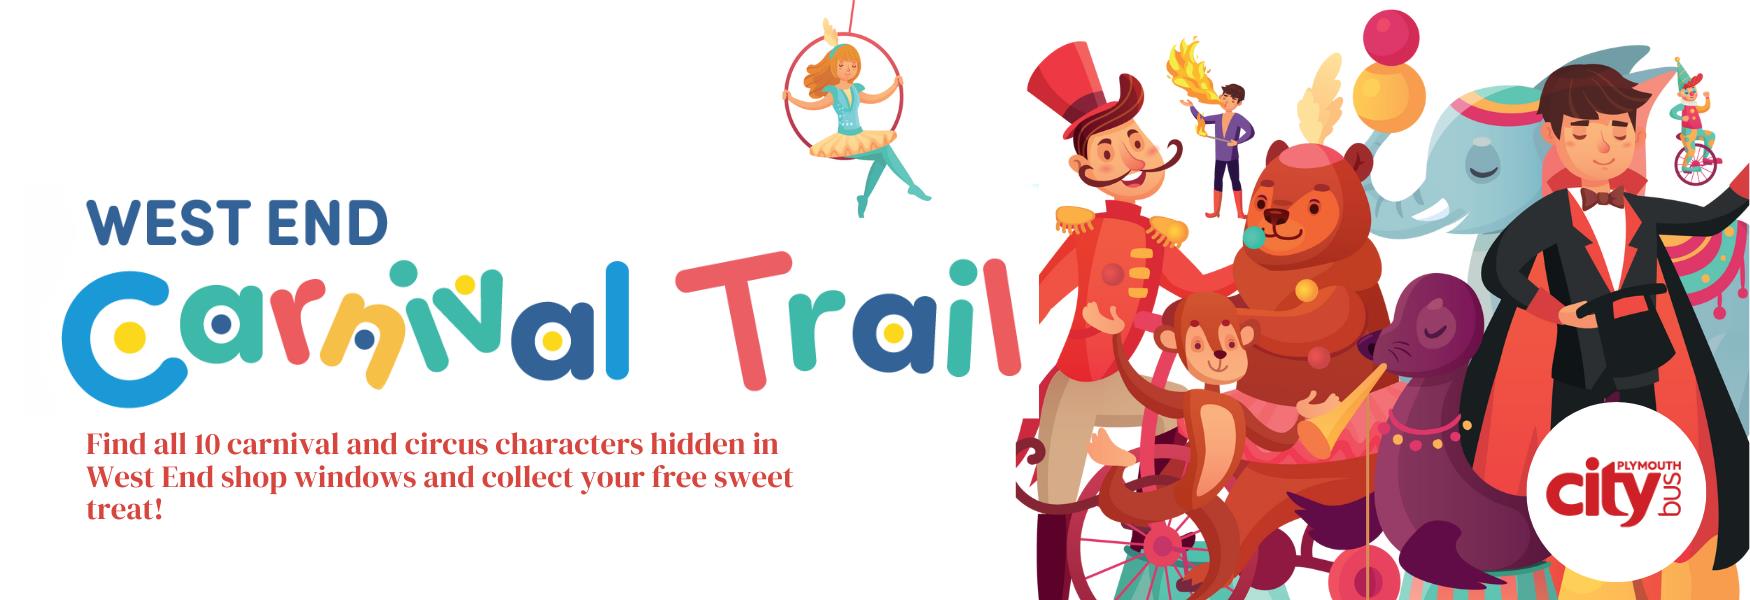 West End Carnival Trail